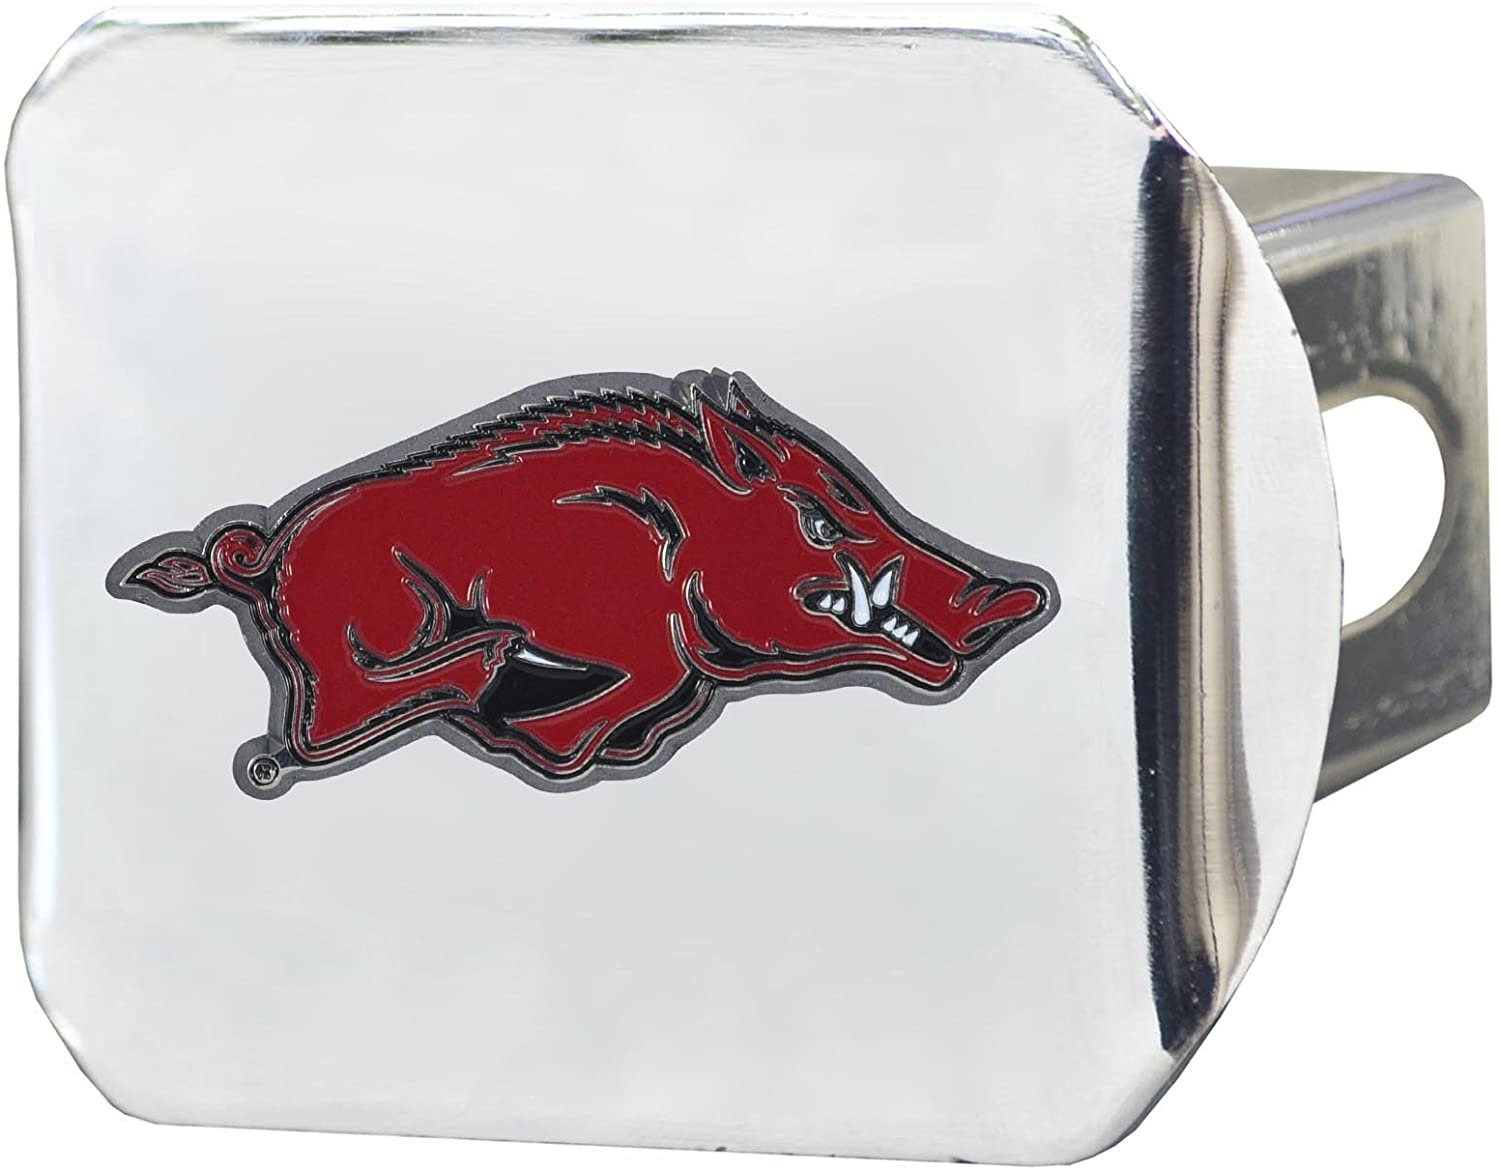 Arkansas Razorbacks Hitch Cover Solid Metal with Color Metal Emblem 2" Square Type III University of